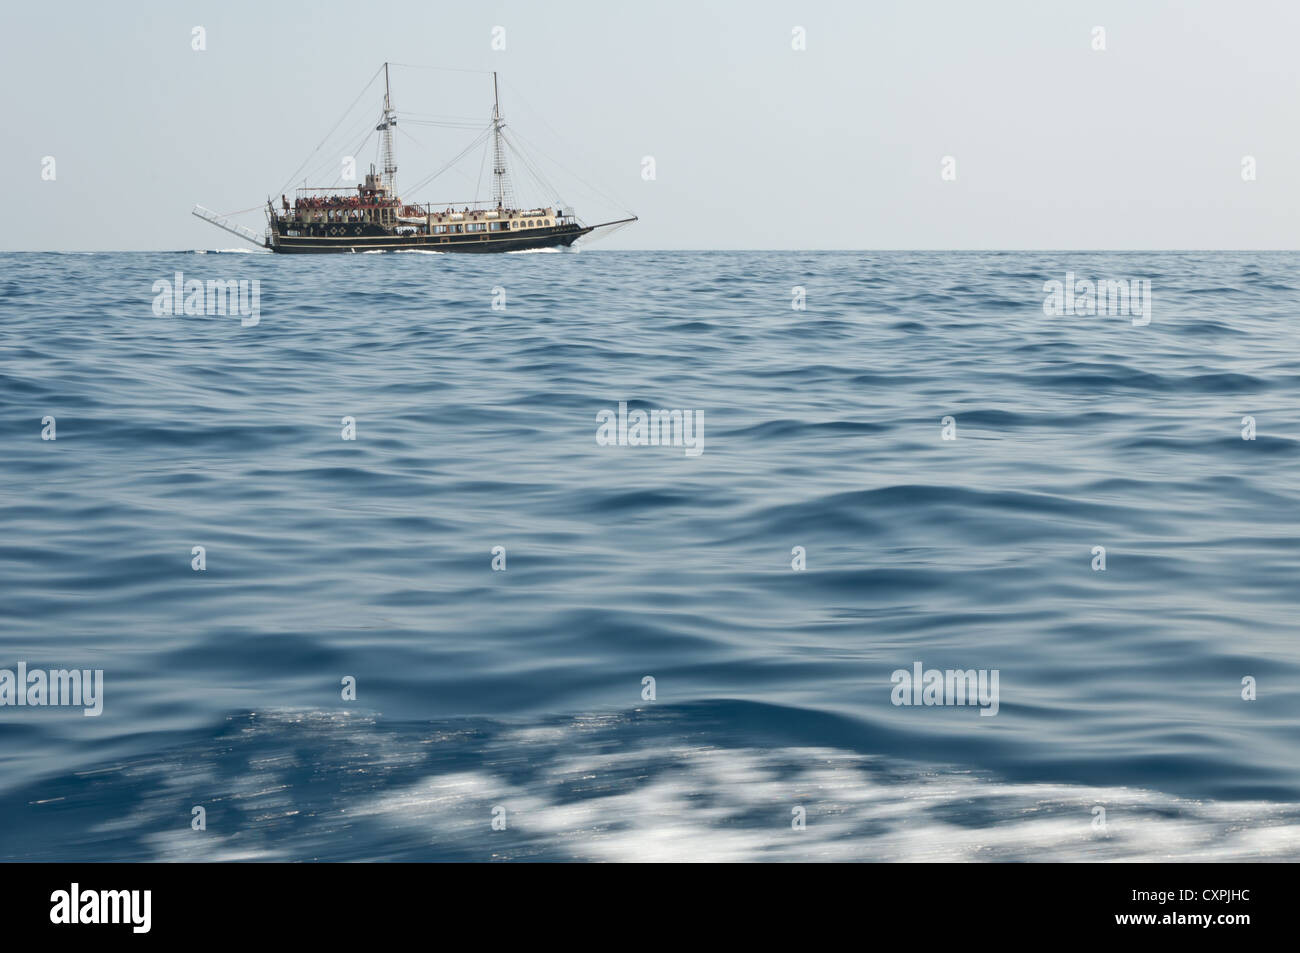 A pirate ship sailing in the Ionian Sea in Greece, Europe Stock Photo